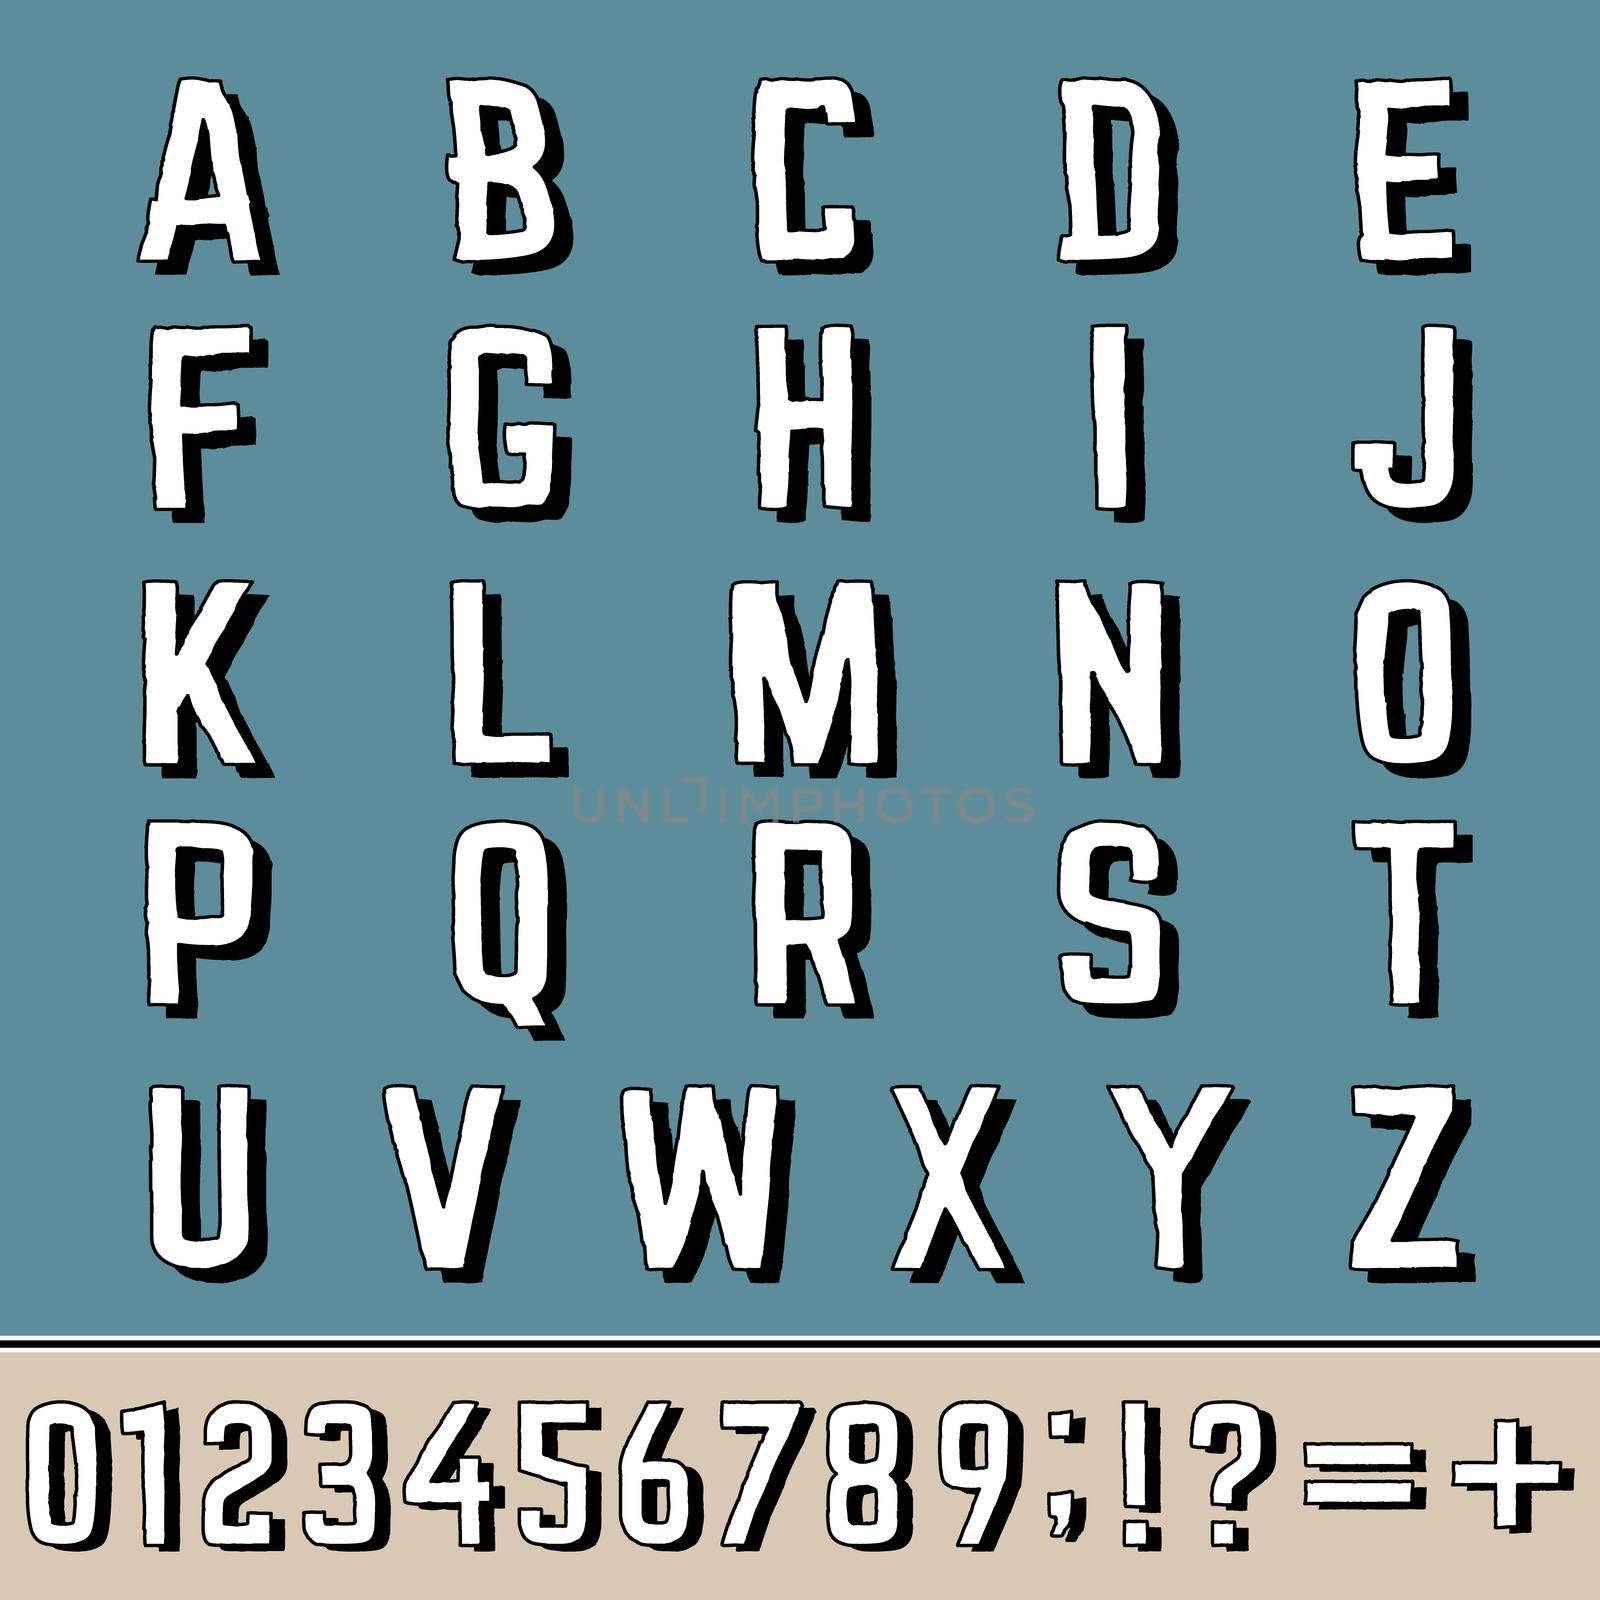 Grunge Alphabet, Letters and Numbers. Cartoon Lettering Design. Vector Font.